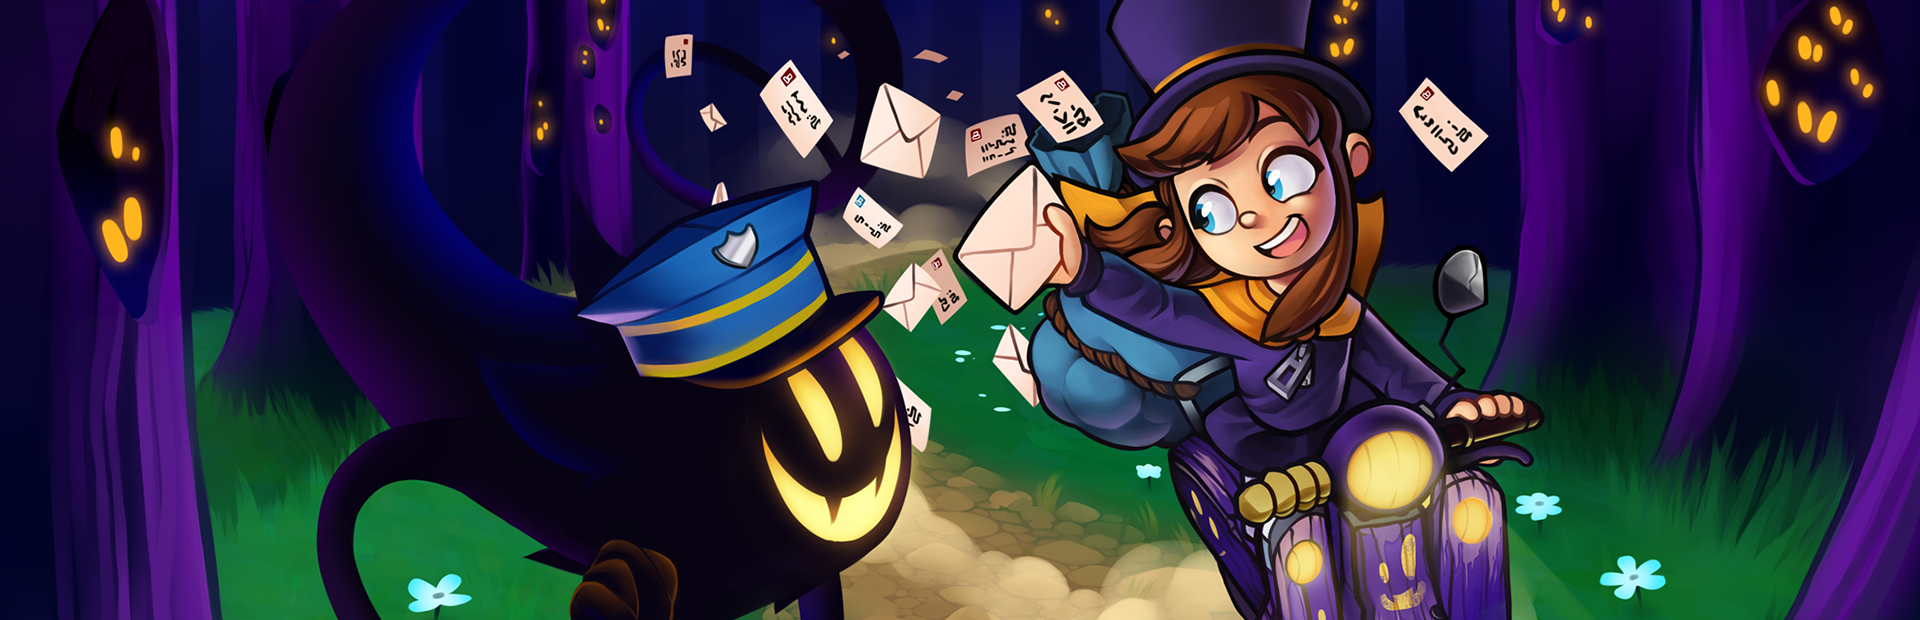 Ch time. Снэтчер a hat in time. A hat in time скрины. A hat in time арт. A hat in time Snatcher Art.